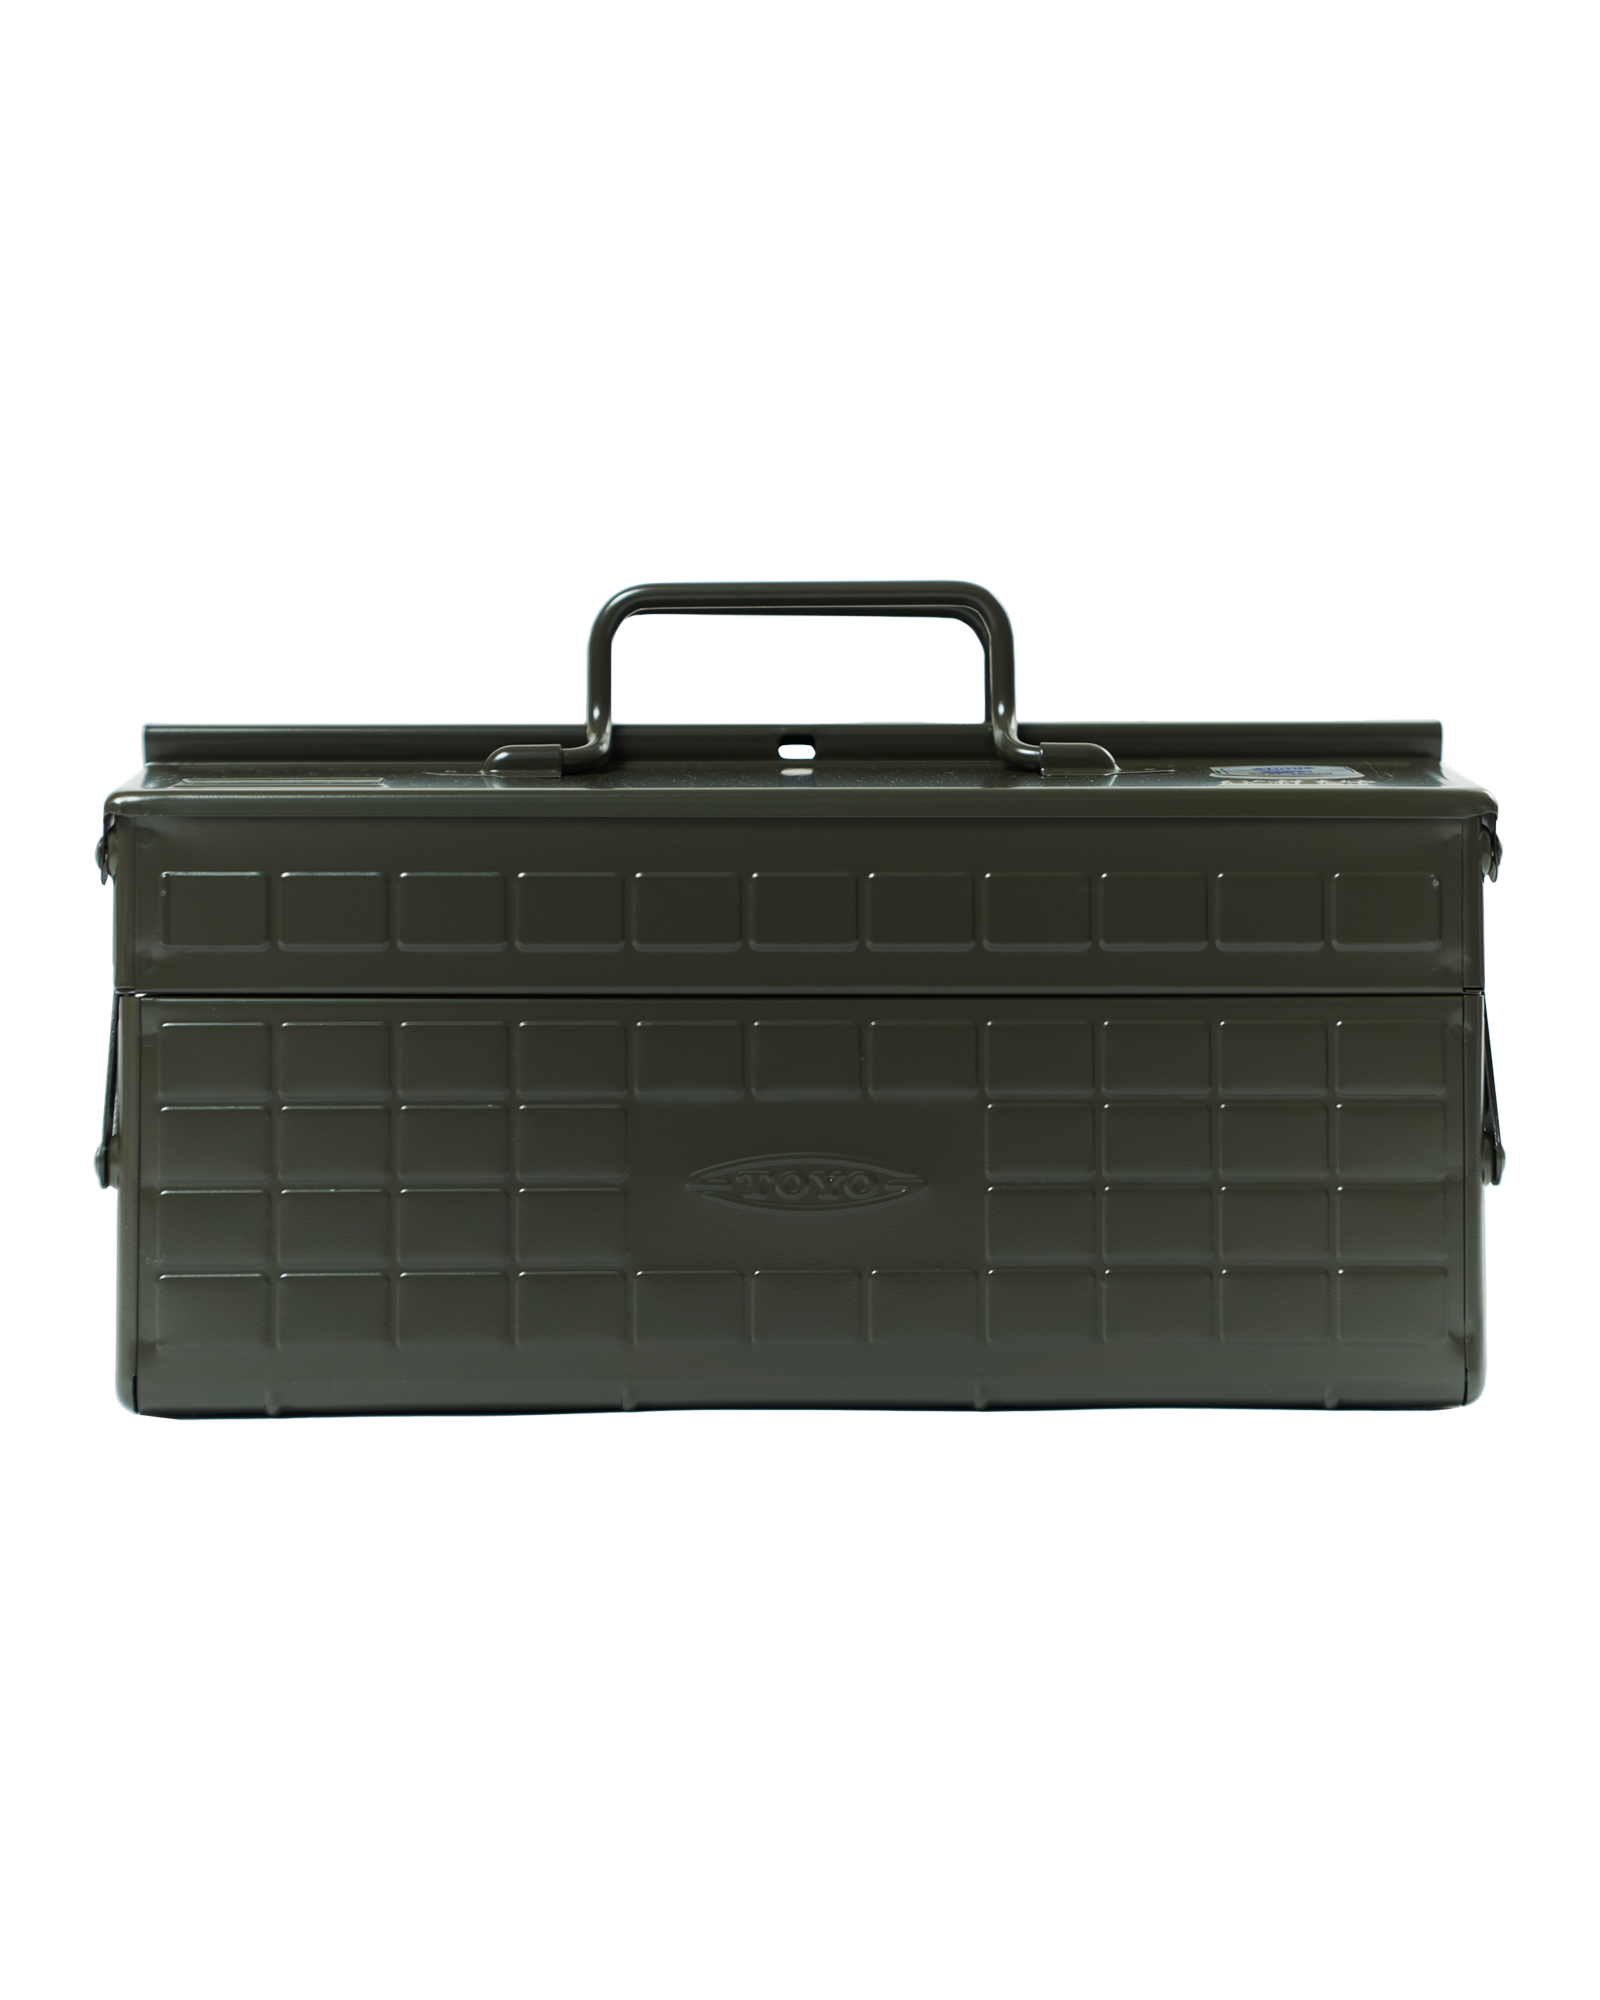 [RENTAL] TOYO Cantilever Toolbox ST-350 (Military Green)